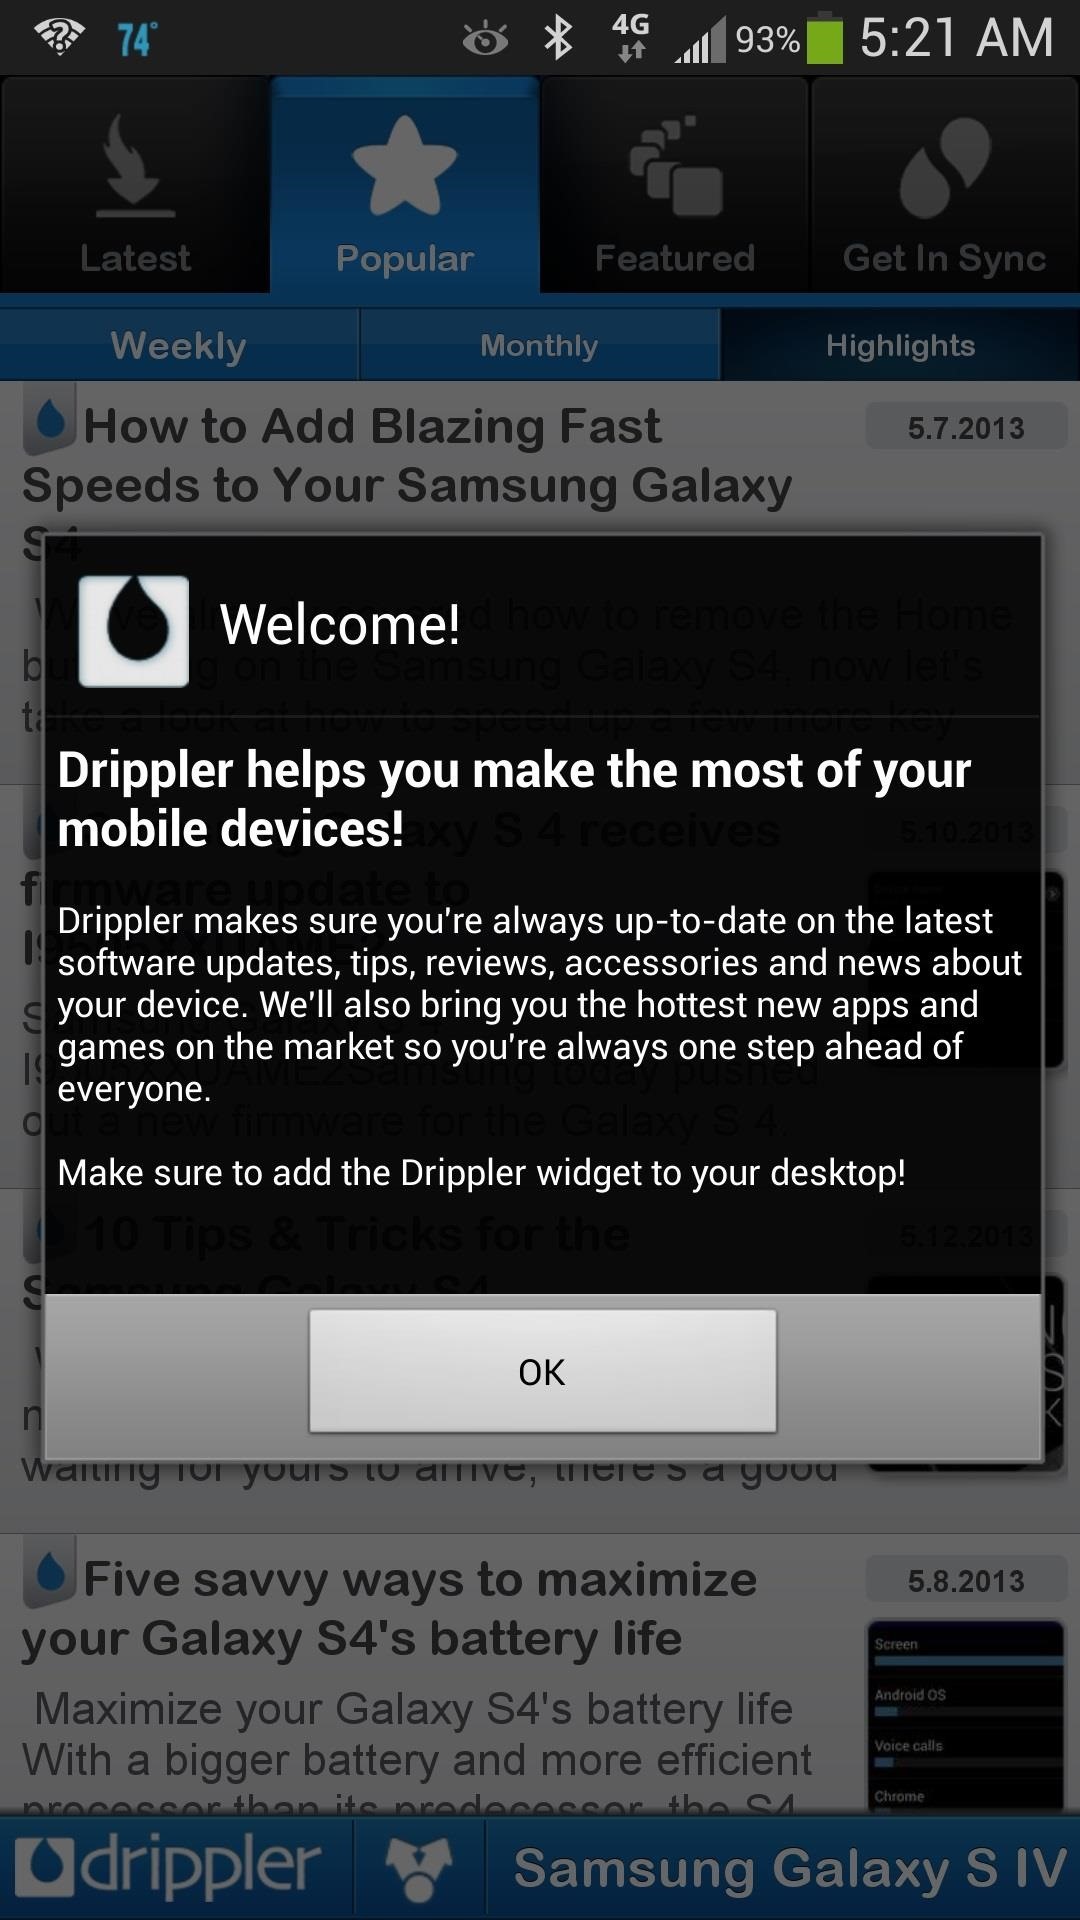 How to Stay Updated on All the Latest News for Your Samsung Galaxy S4 with Drippler